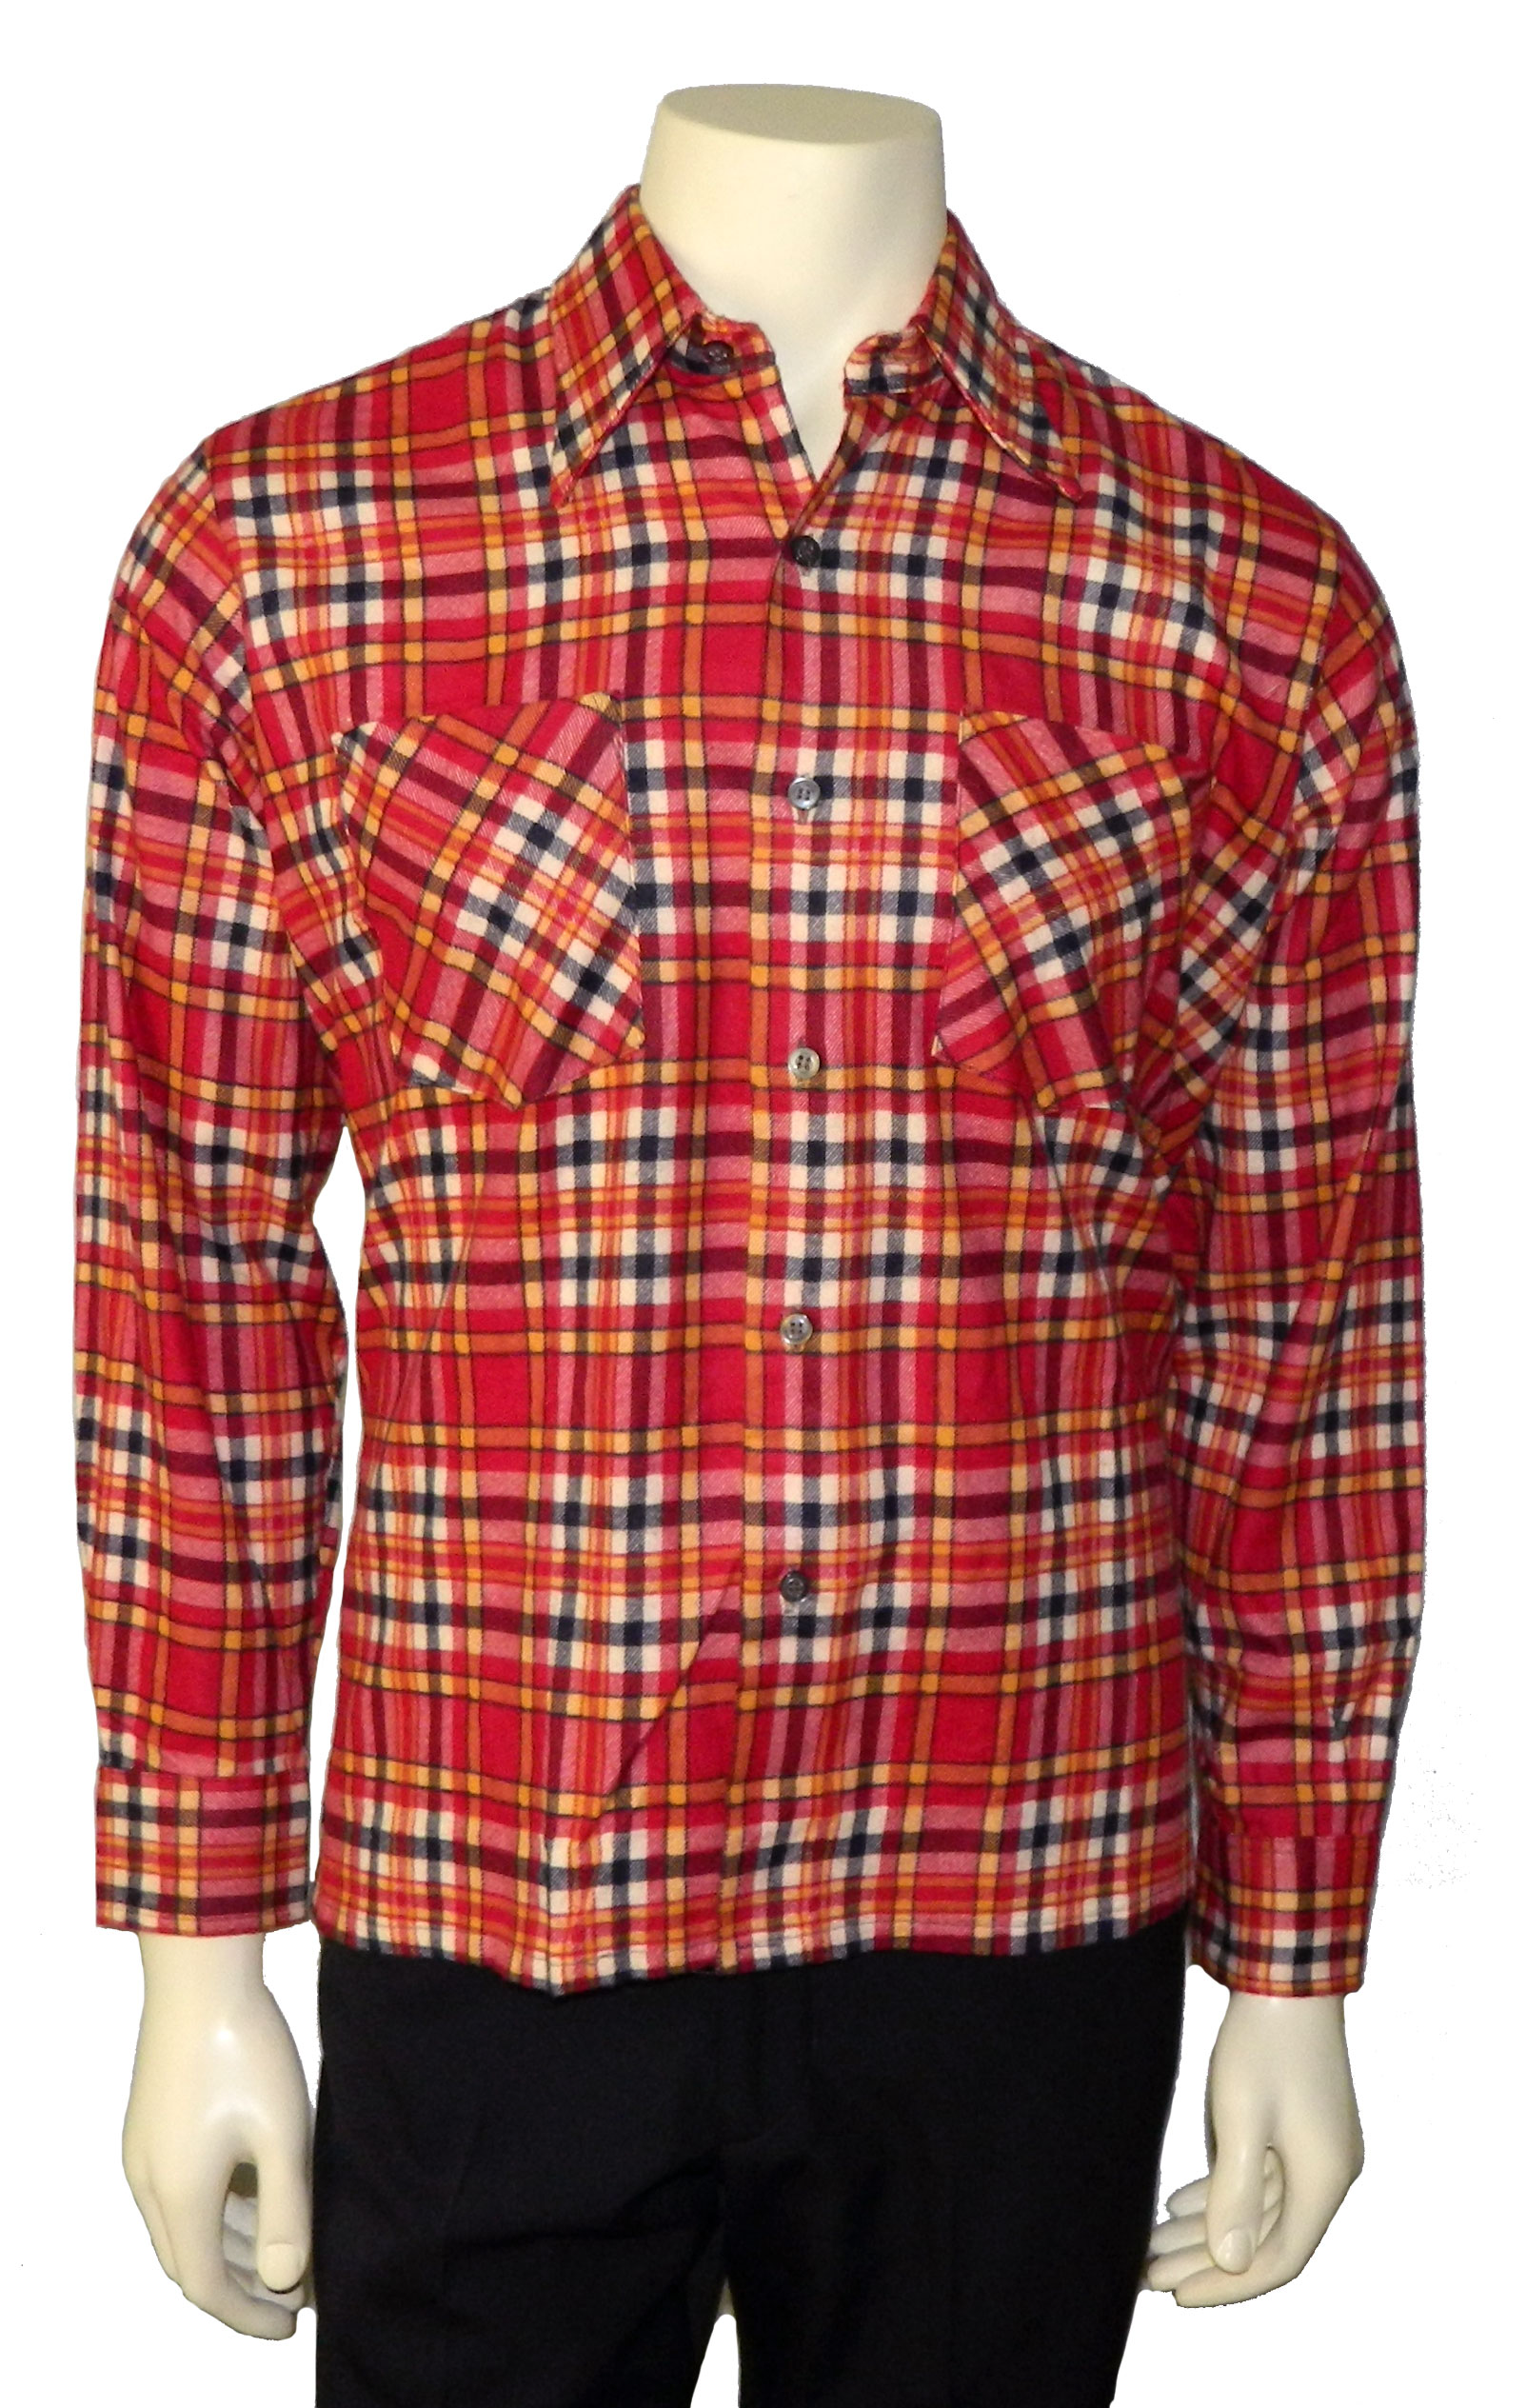 1970s red flannel shirt